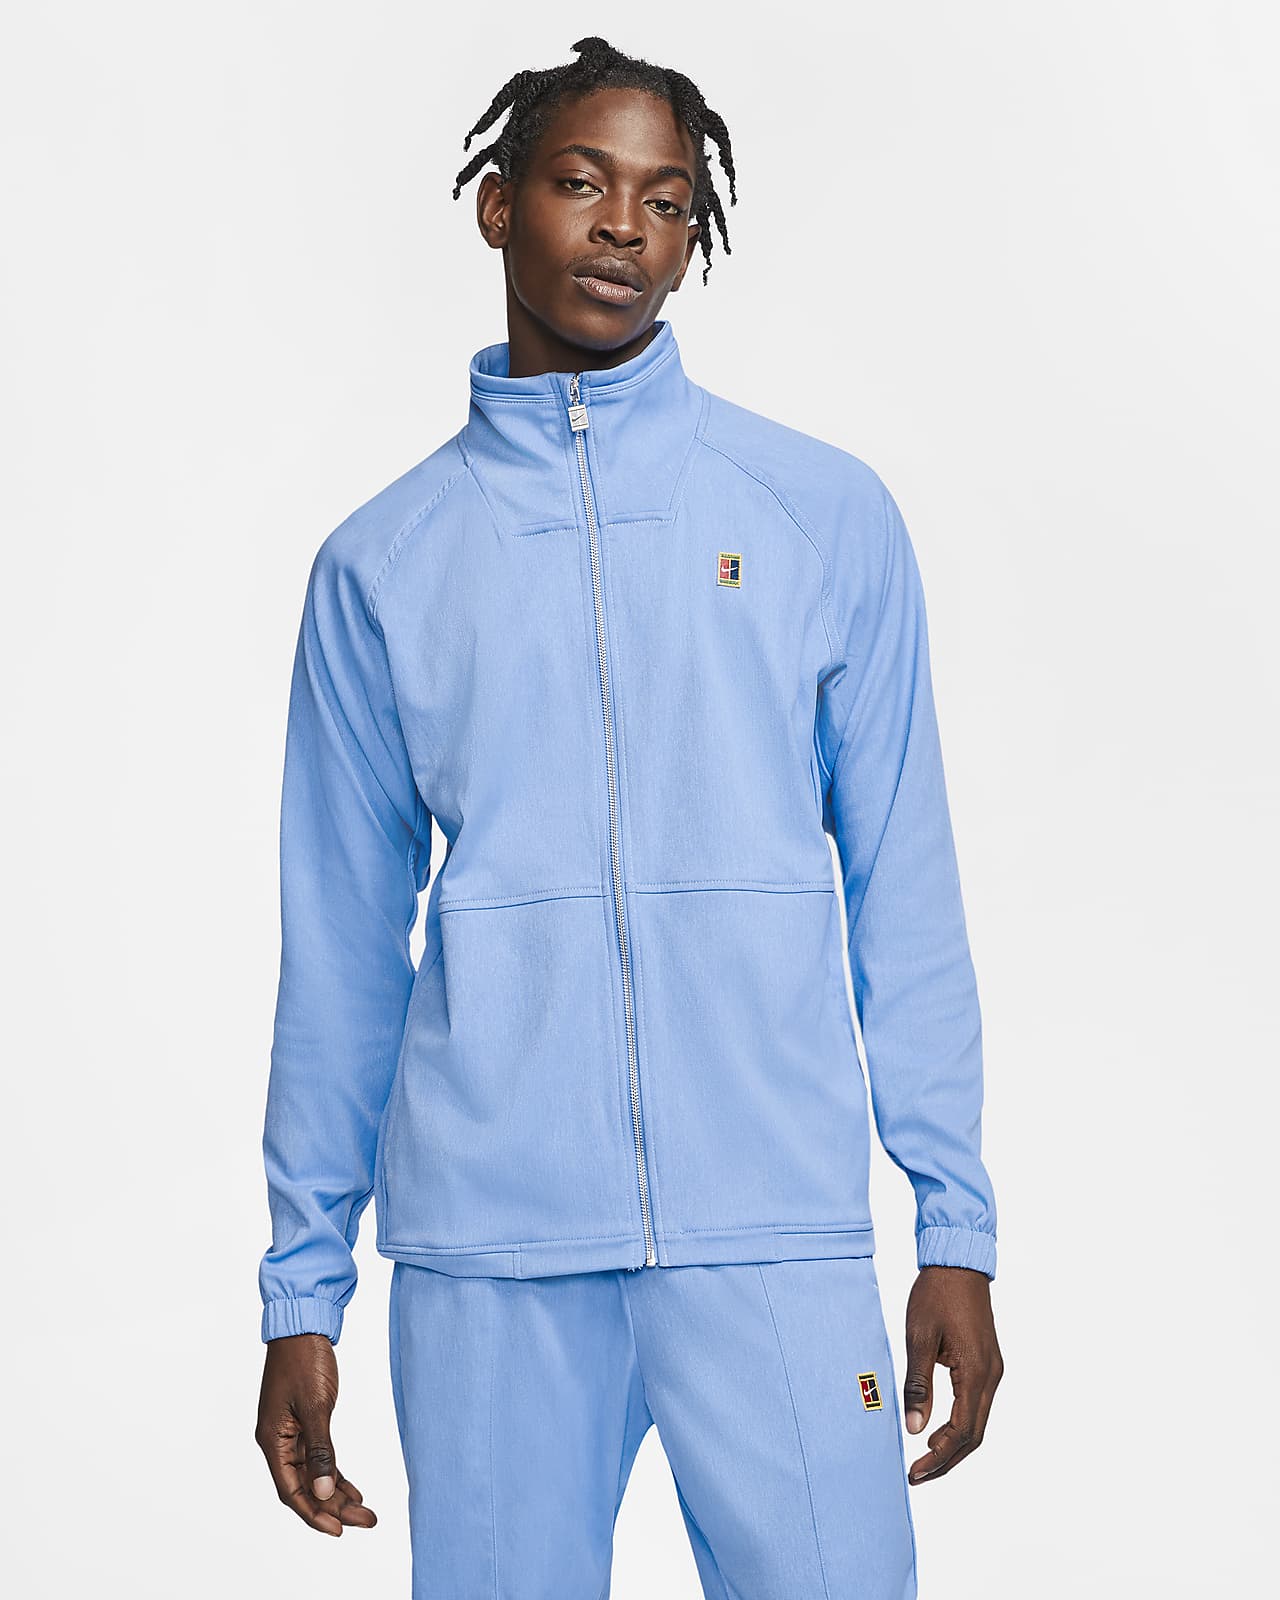 adidas tennis warm up suits